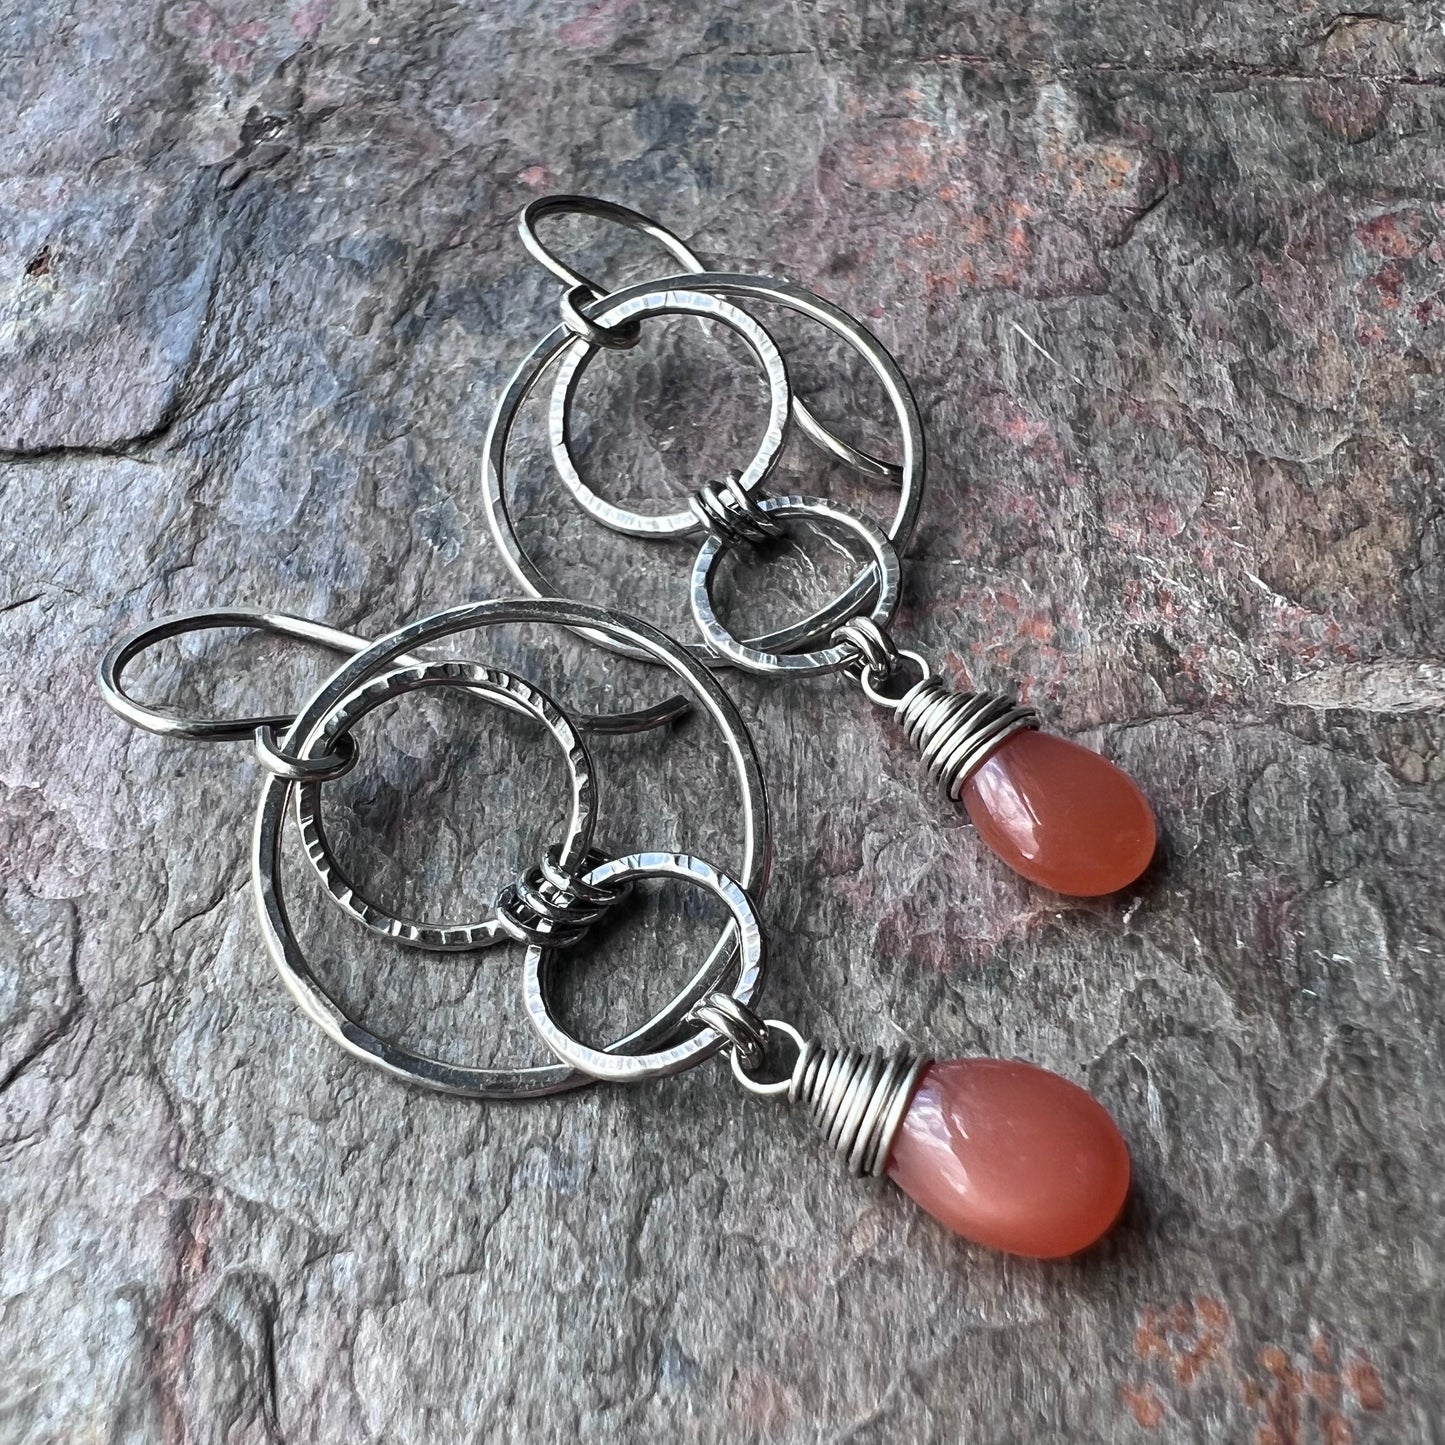 Peach Moonstone Sterling Silver Earrings - Peach Moonstone Teardrops and Hammered Circles on Sterling Silver Earwires